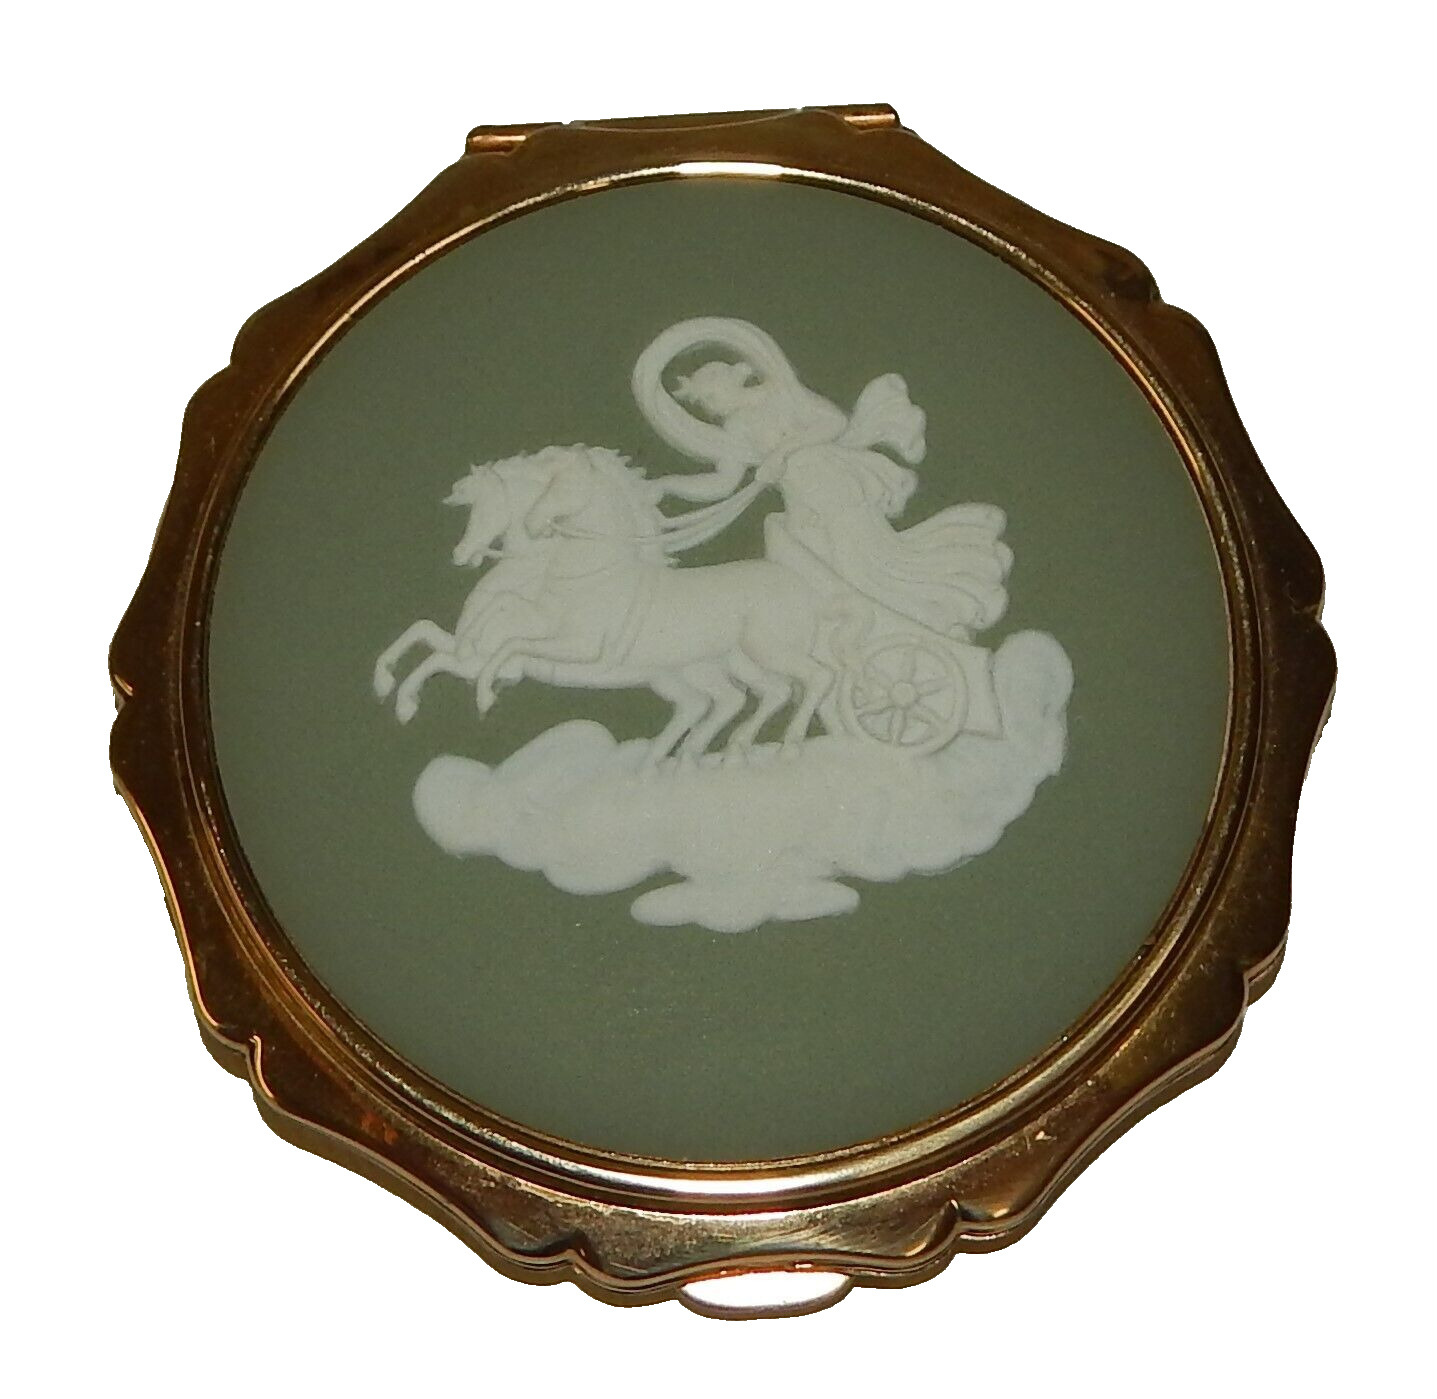 Vintage Stratton England Powder Compact with Green Wedgwood Jasperware Chariot